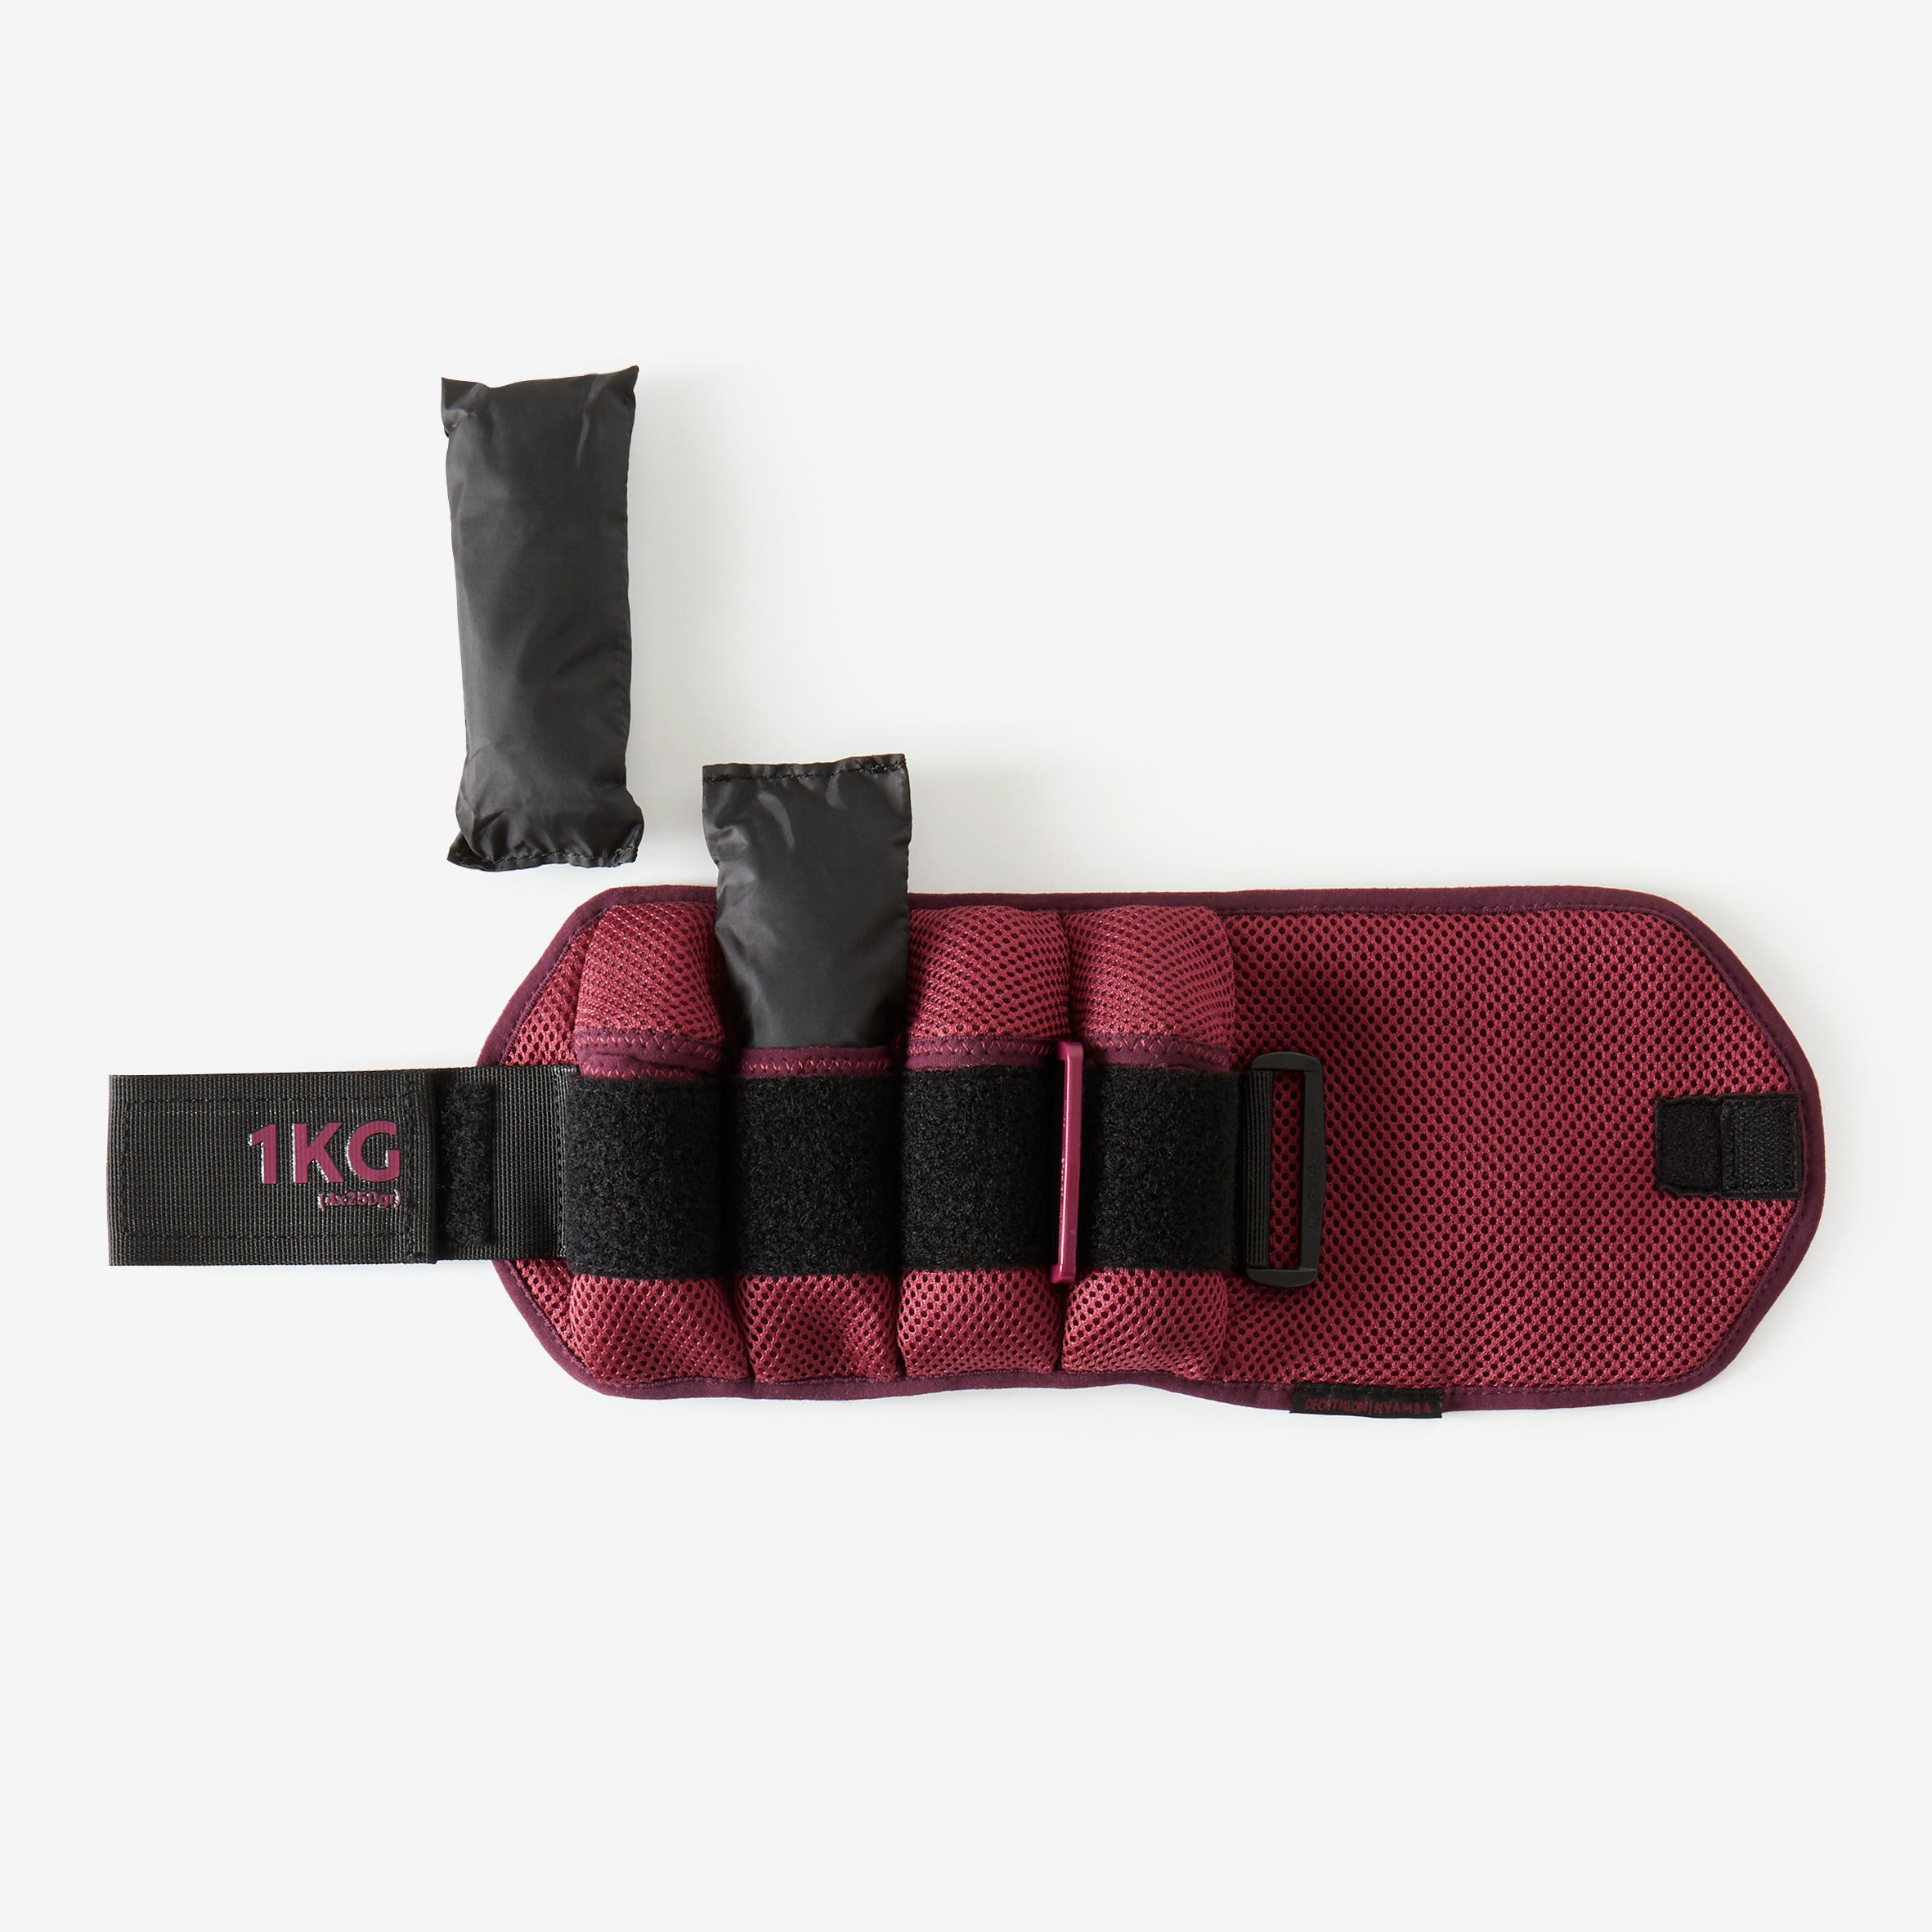 1 kg Adjustable Wrist / Ankle Weights Twin-Pack - Burgundy 2/5